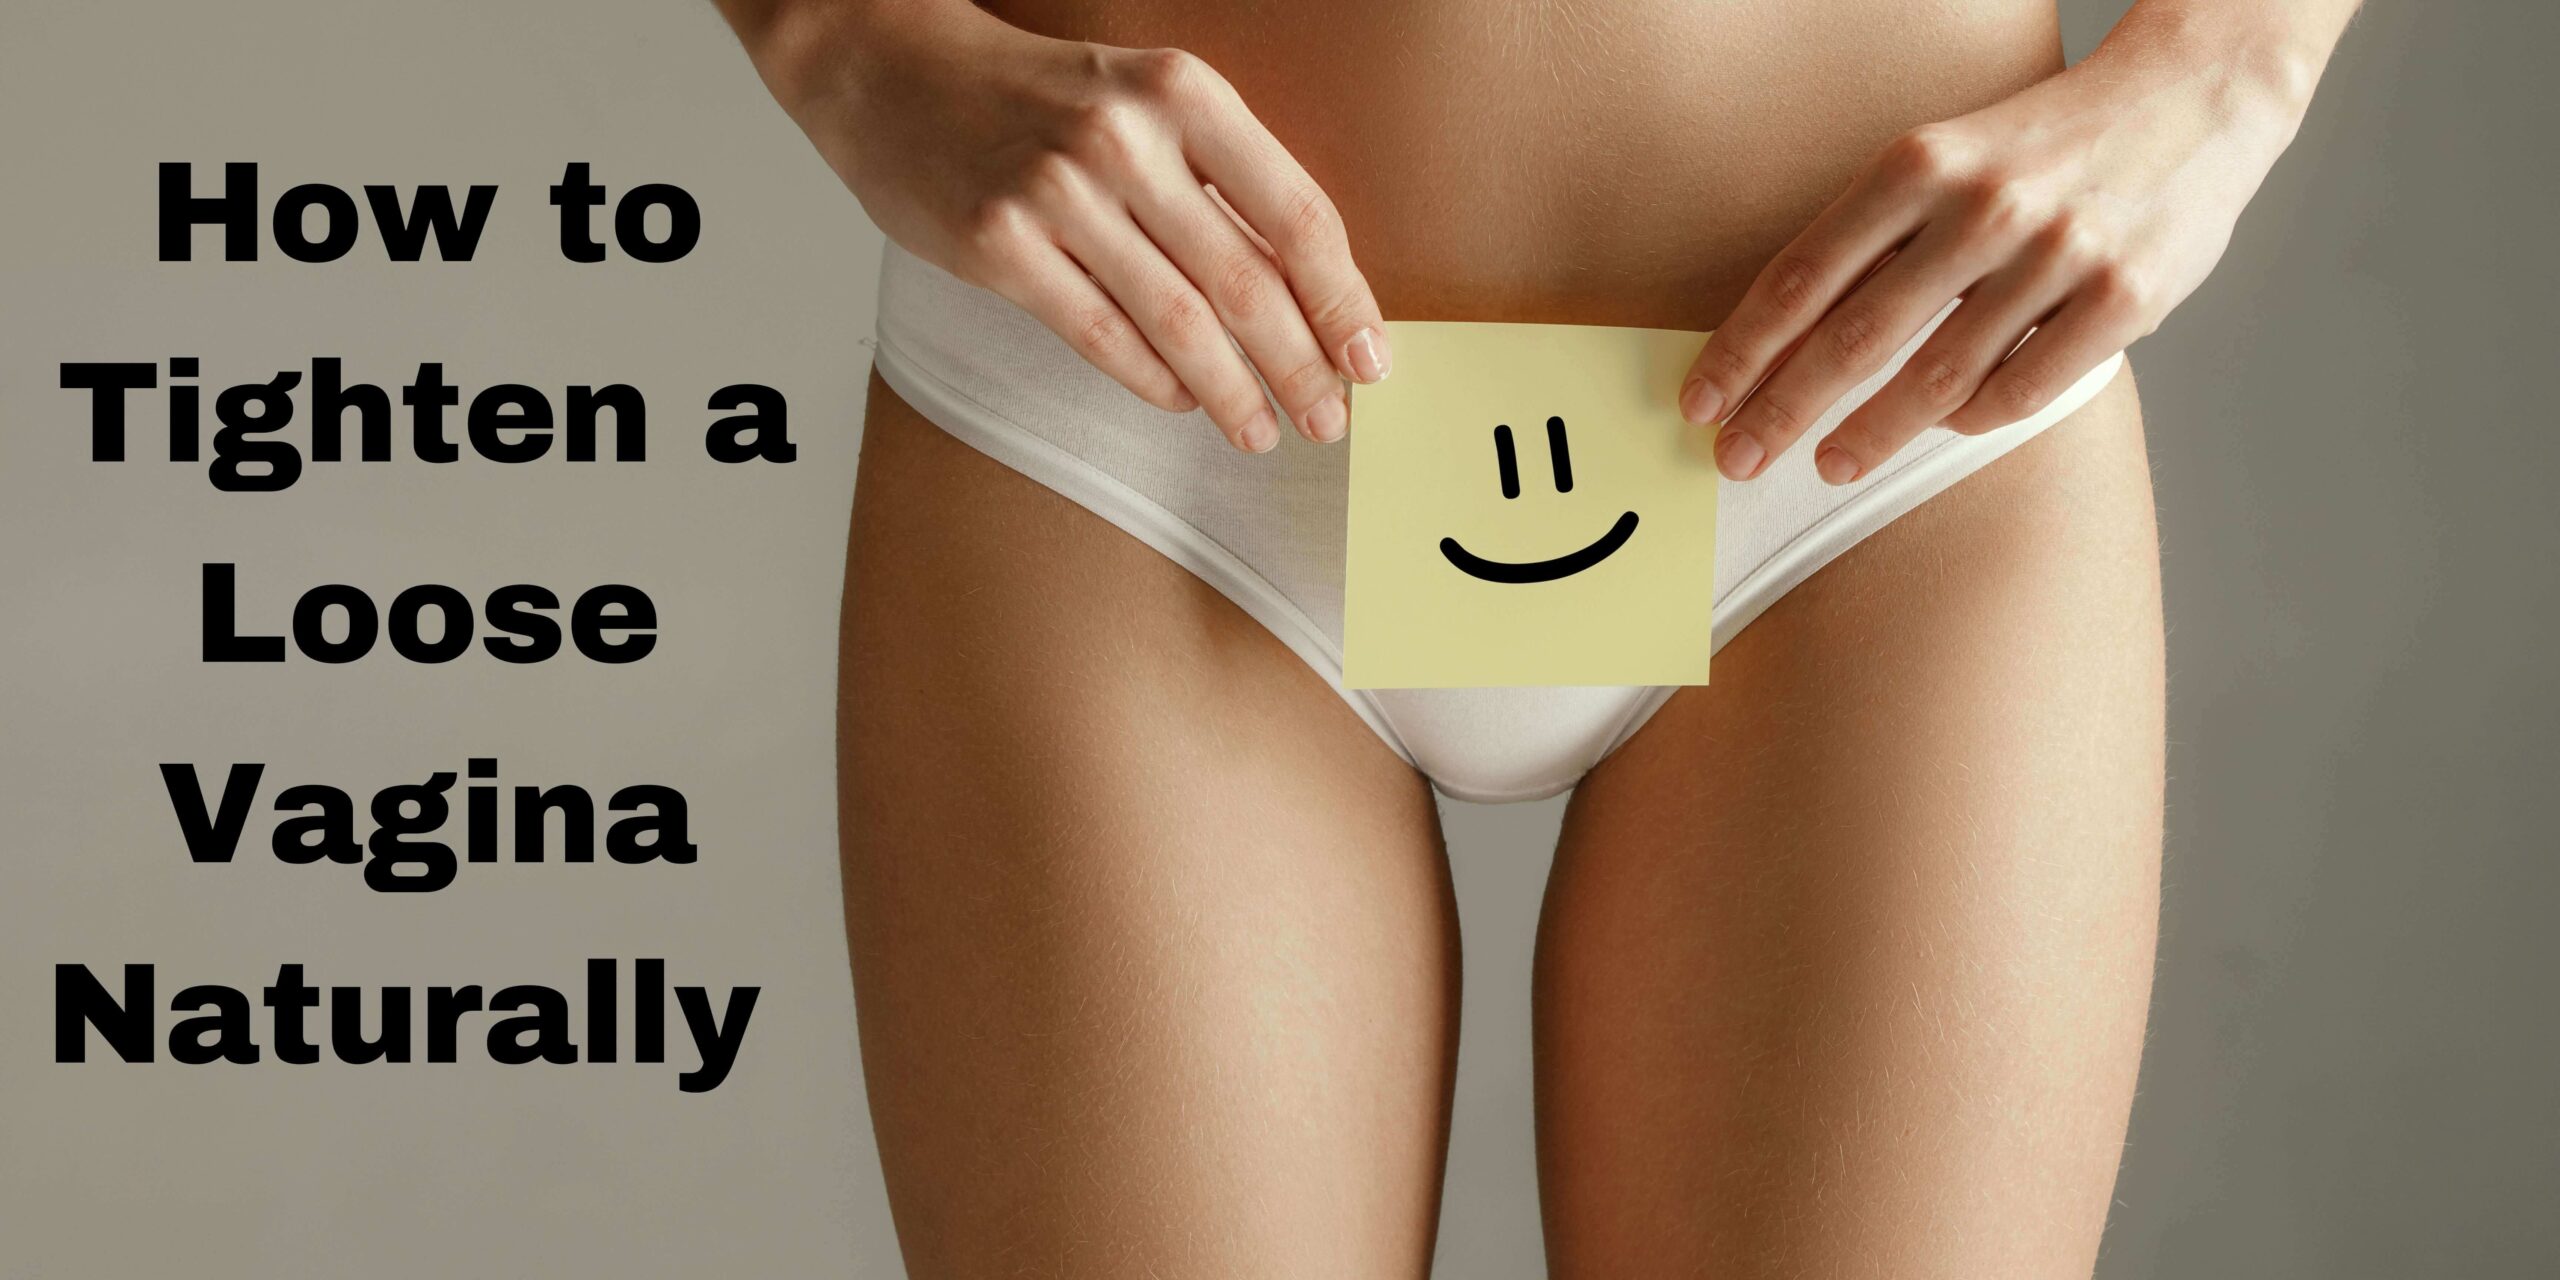 How to Tighten a Loose Vagina Naturally and Safely